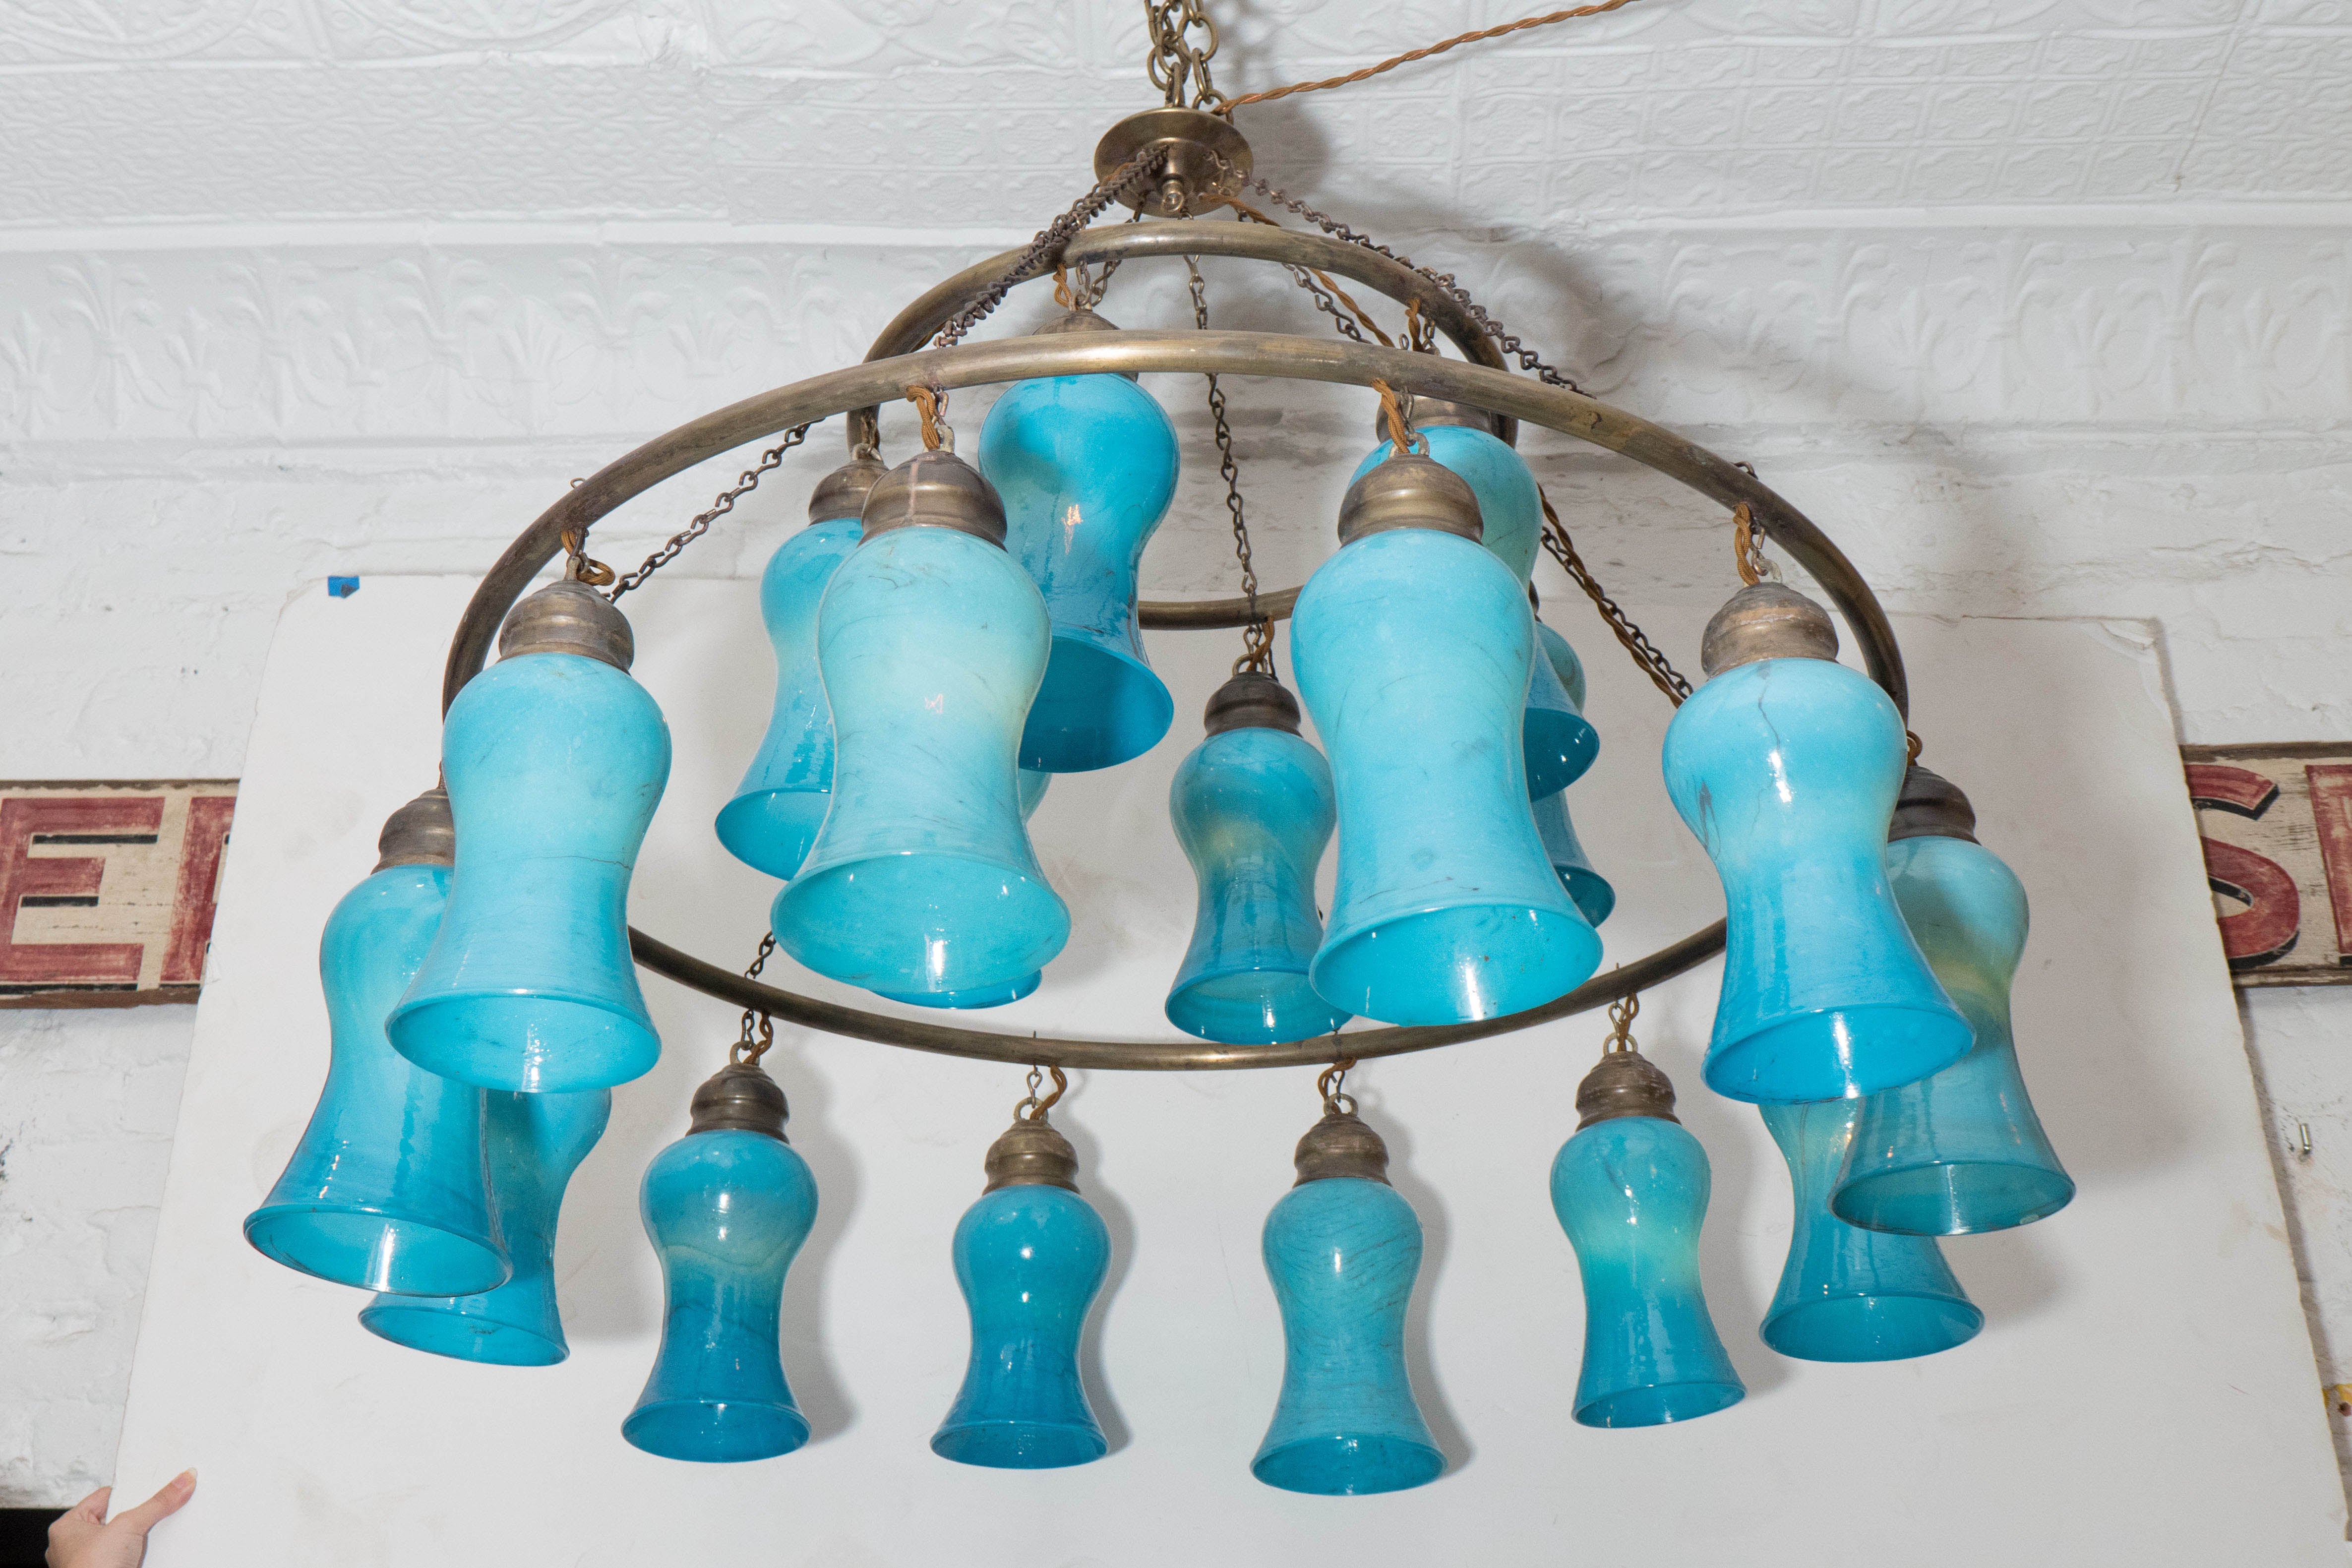 Egyptian Handblown Chandelier with Turquoise Bell-Shaped Glass For Sale